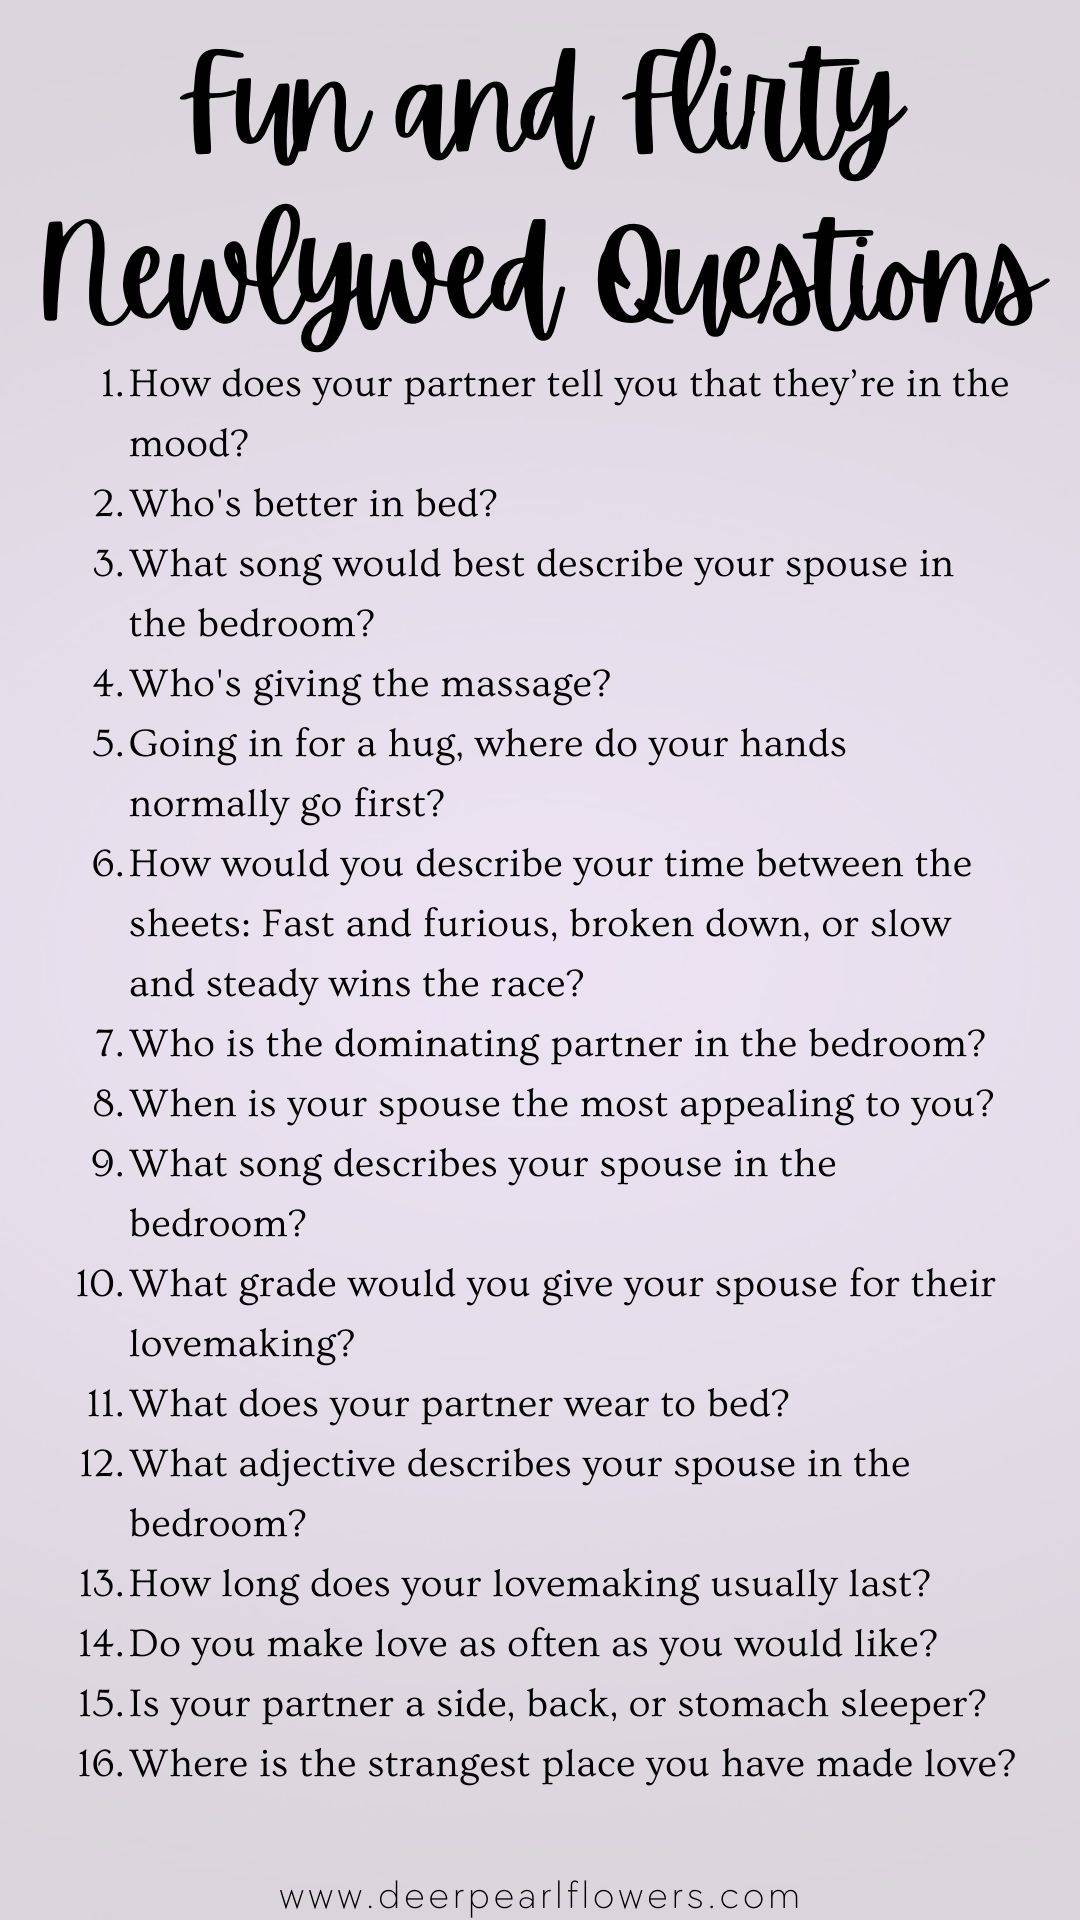 Fun and Flirty Newlywed Questions